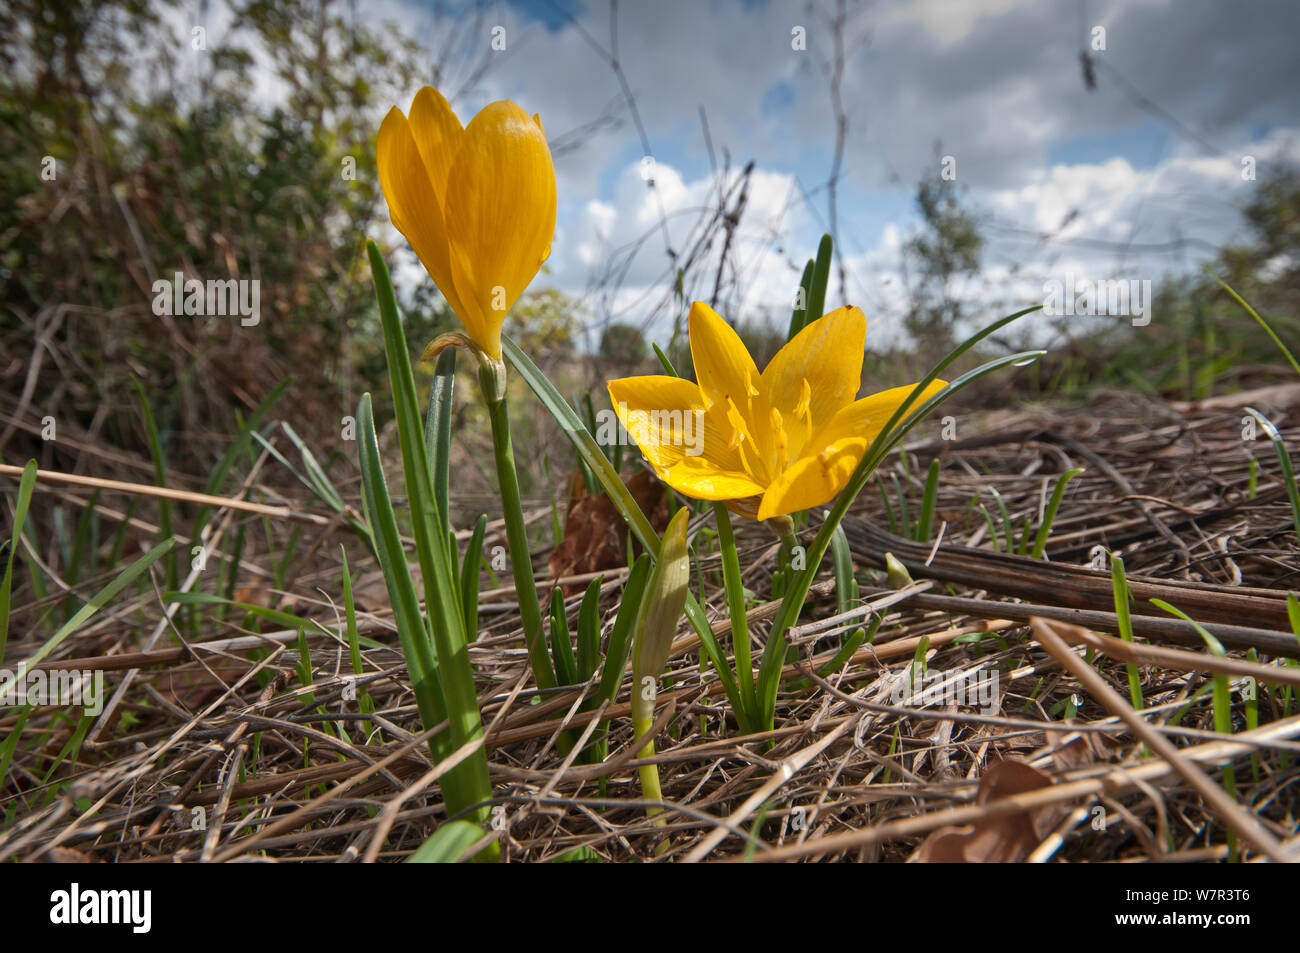 Yellow Sternbergia (Sternbergia lutea) in flower, near the Etruscan tombs at Norchia, near Viterbo, Lazio, Italy, October Stock Photo